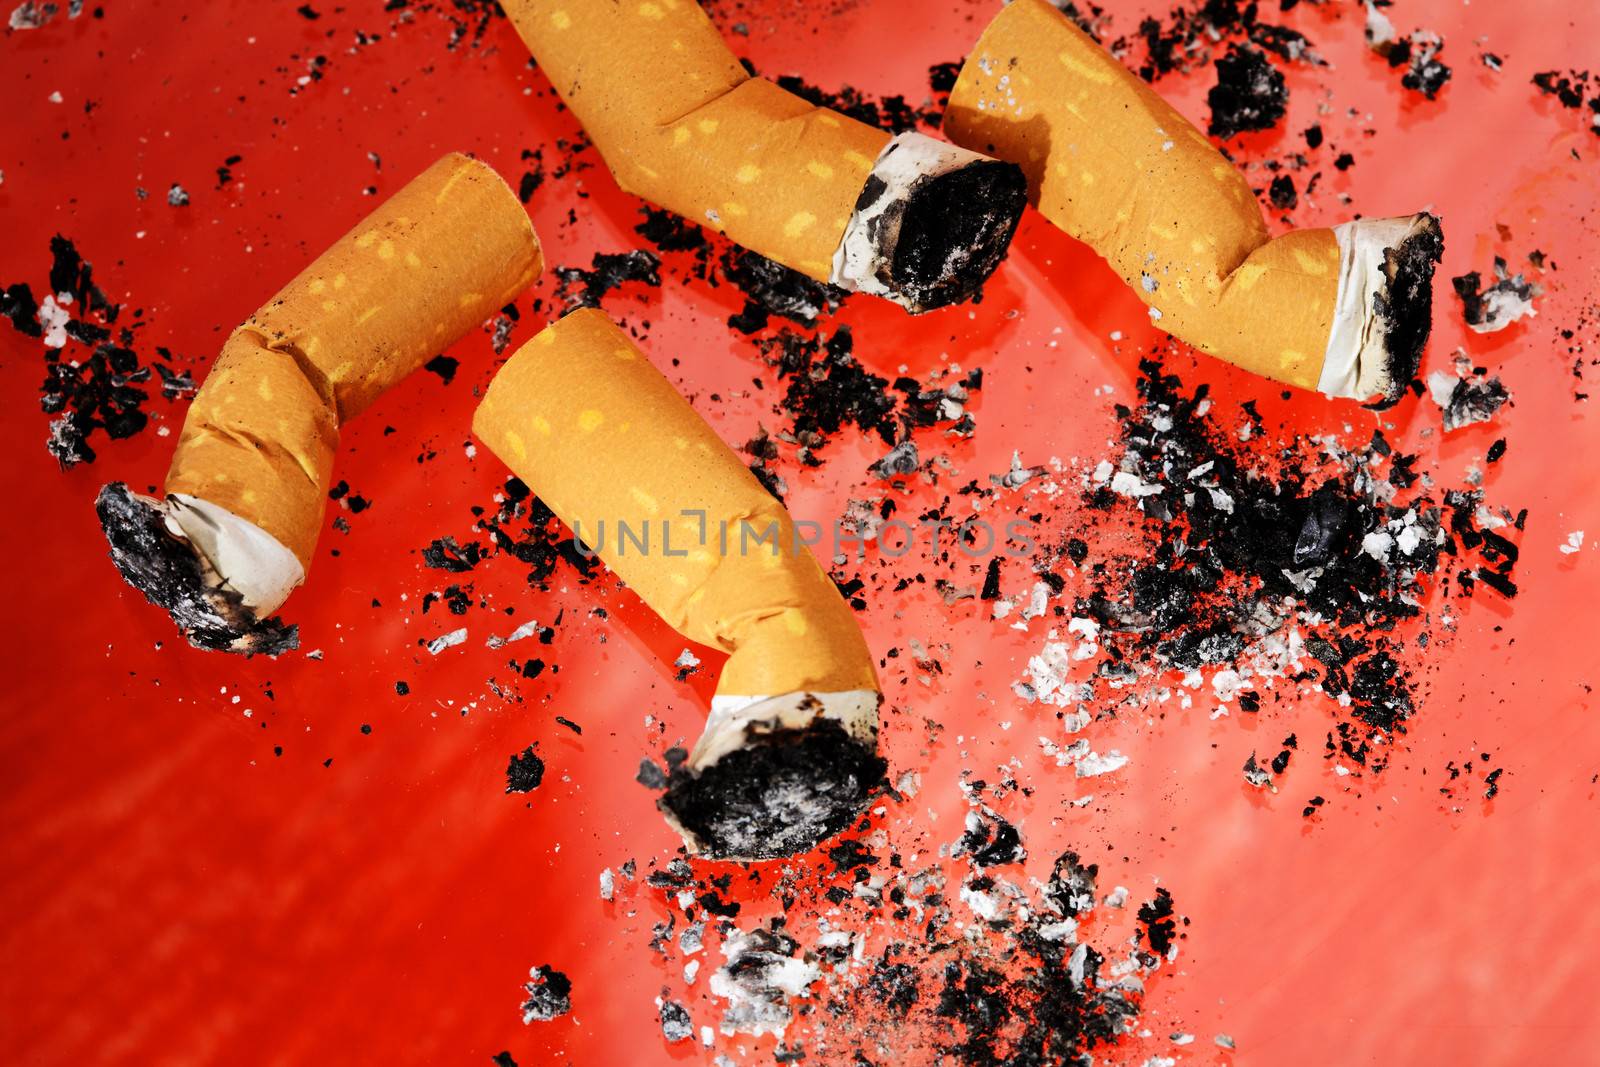 Cigarette Butts with ashes on red background.